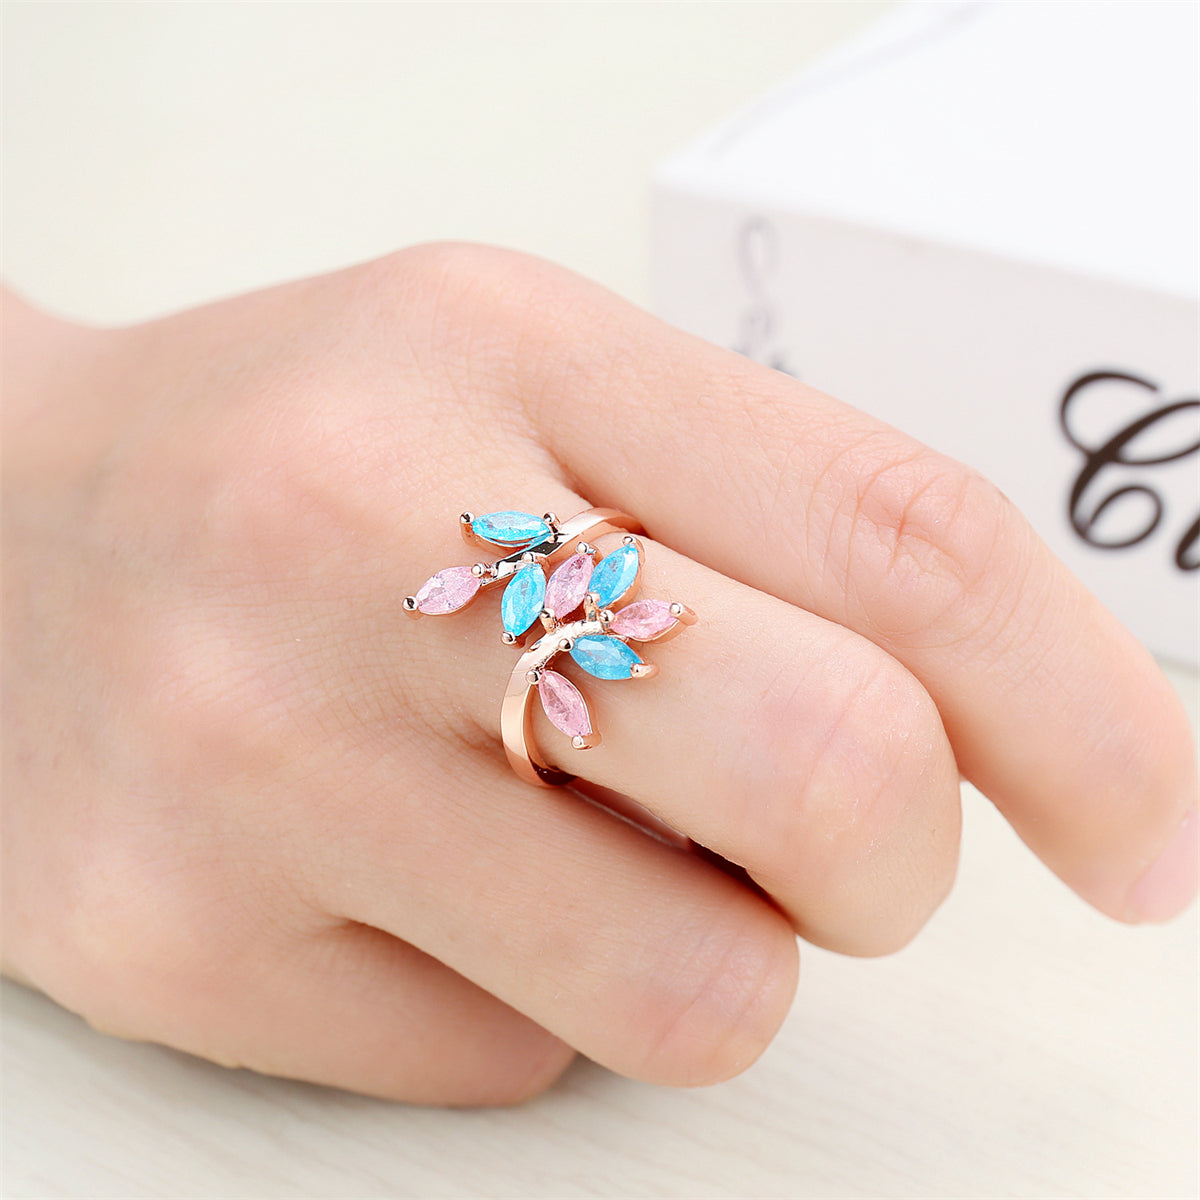 Pink & Blue Crystal 18K Rose Gold-Plated Leaves Bypass Ring